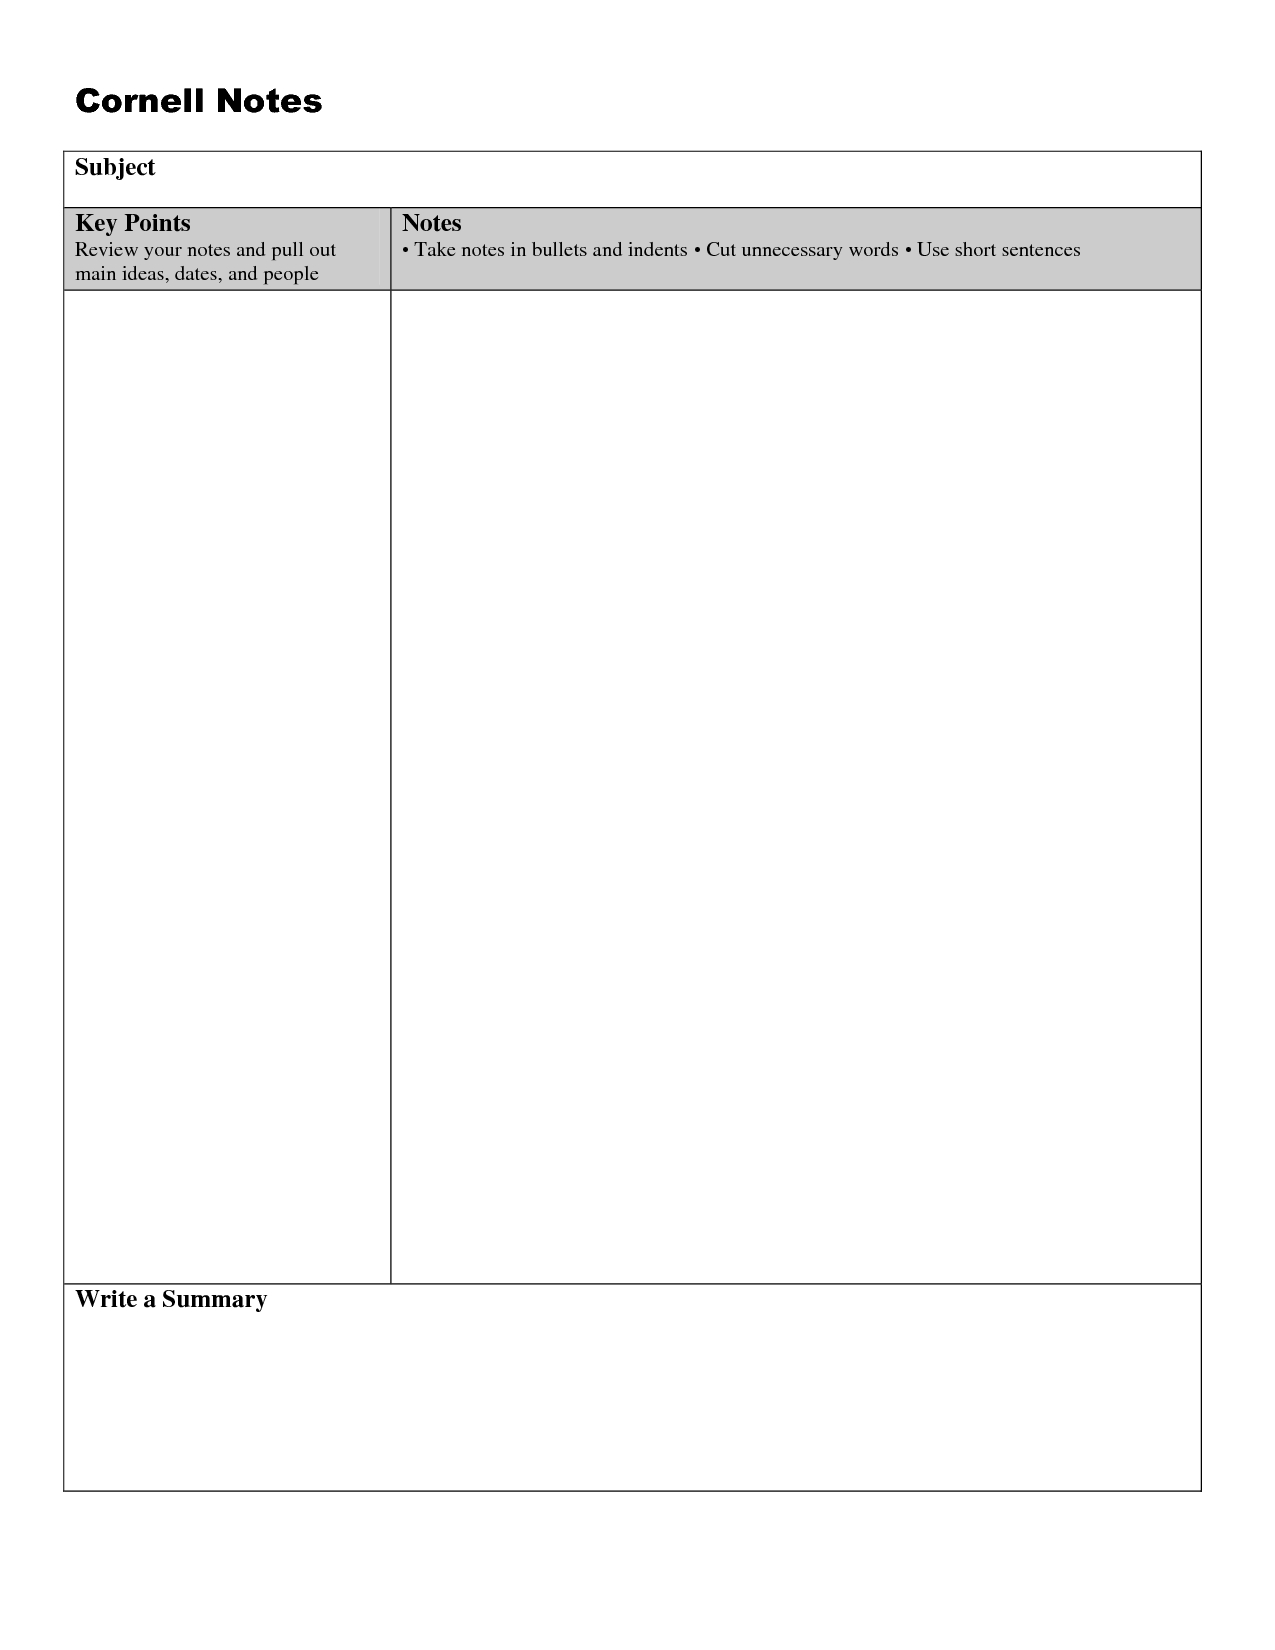 Cornell Notes Template Doc Bcornell Notes Template Docb intended for Cornell Note Template Word